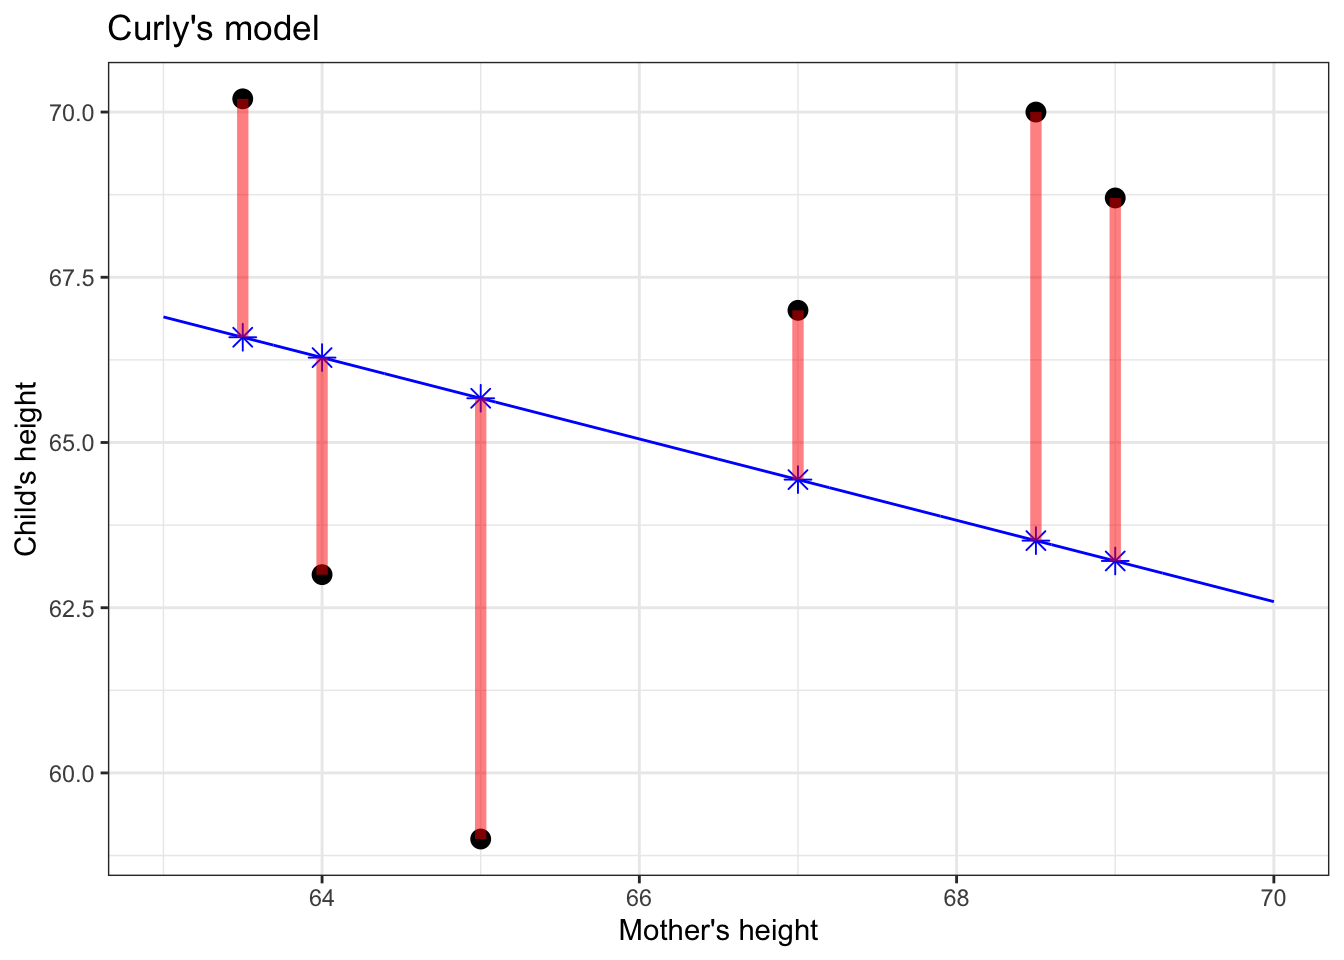 Figure 5.3: The model error for each data point (shown as red line segments) is the distance between the response value (vertical position of black dot) and the corresponding model value (blue \(\star\)).